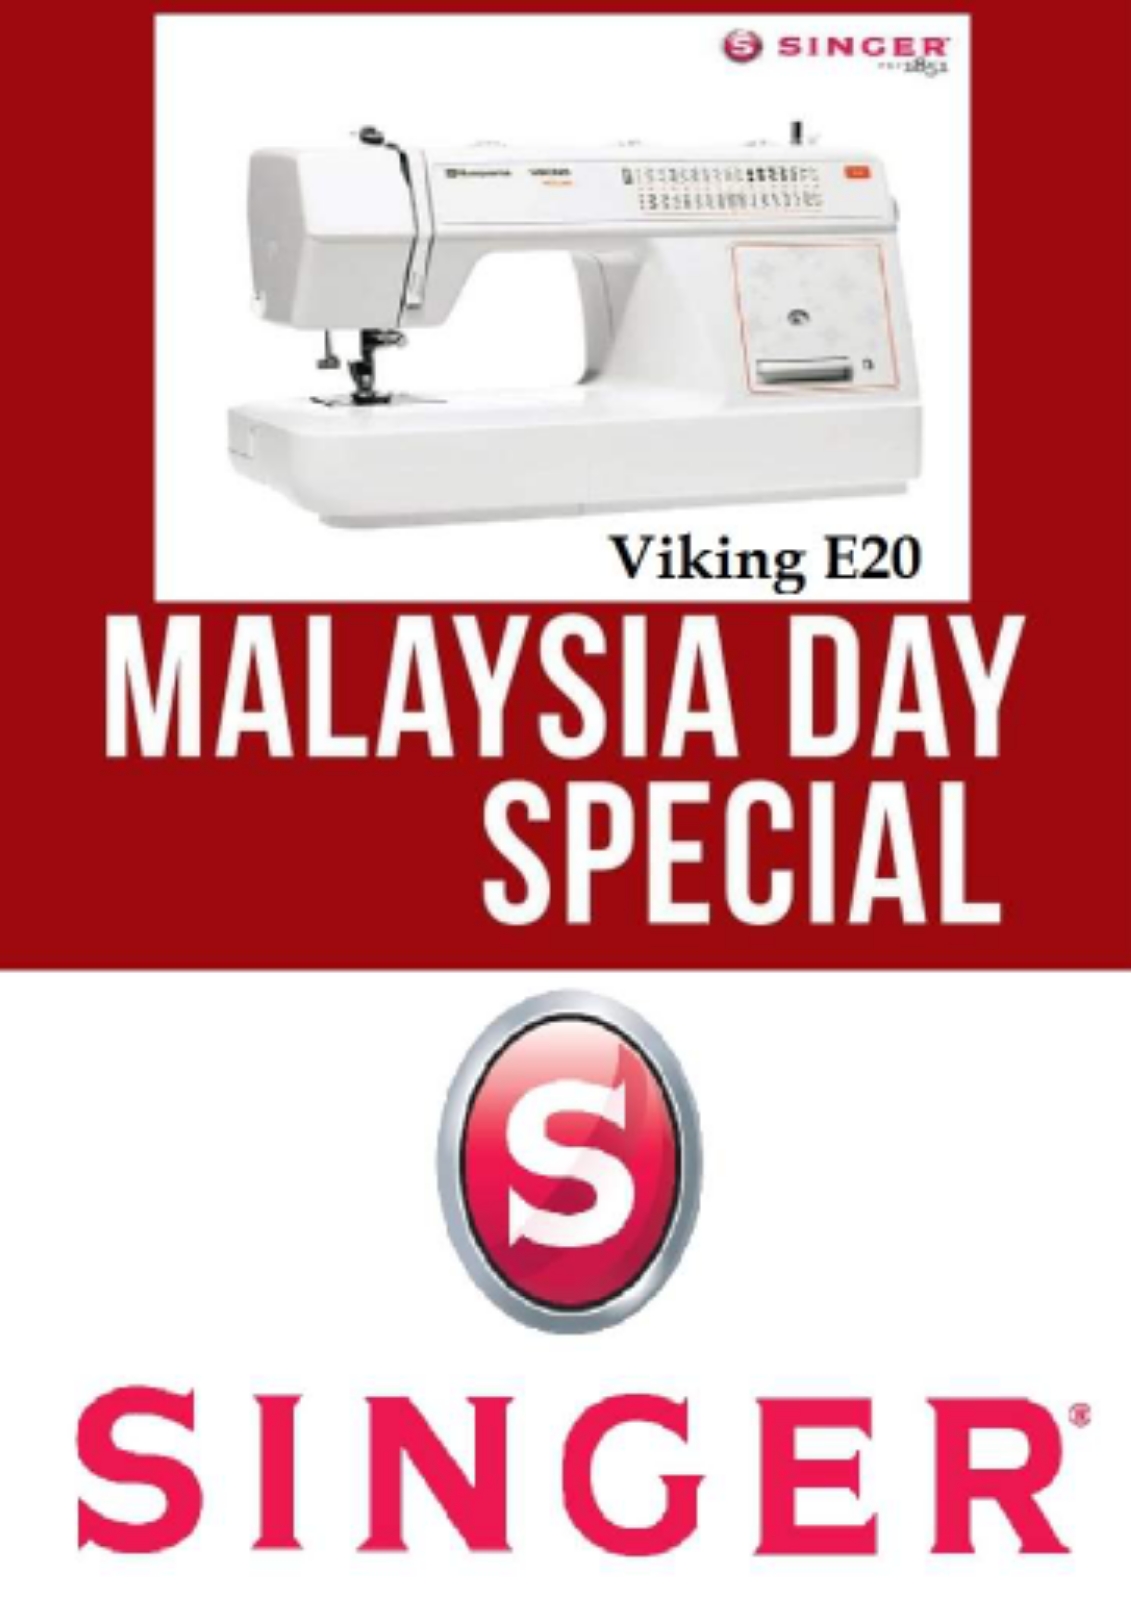 MALAYSIA DAY SPECIAL PRICE